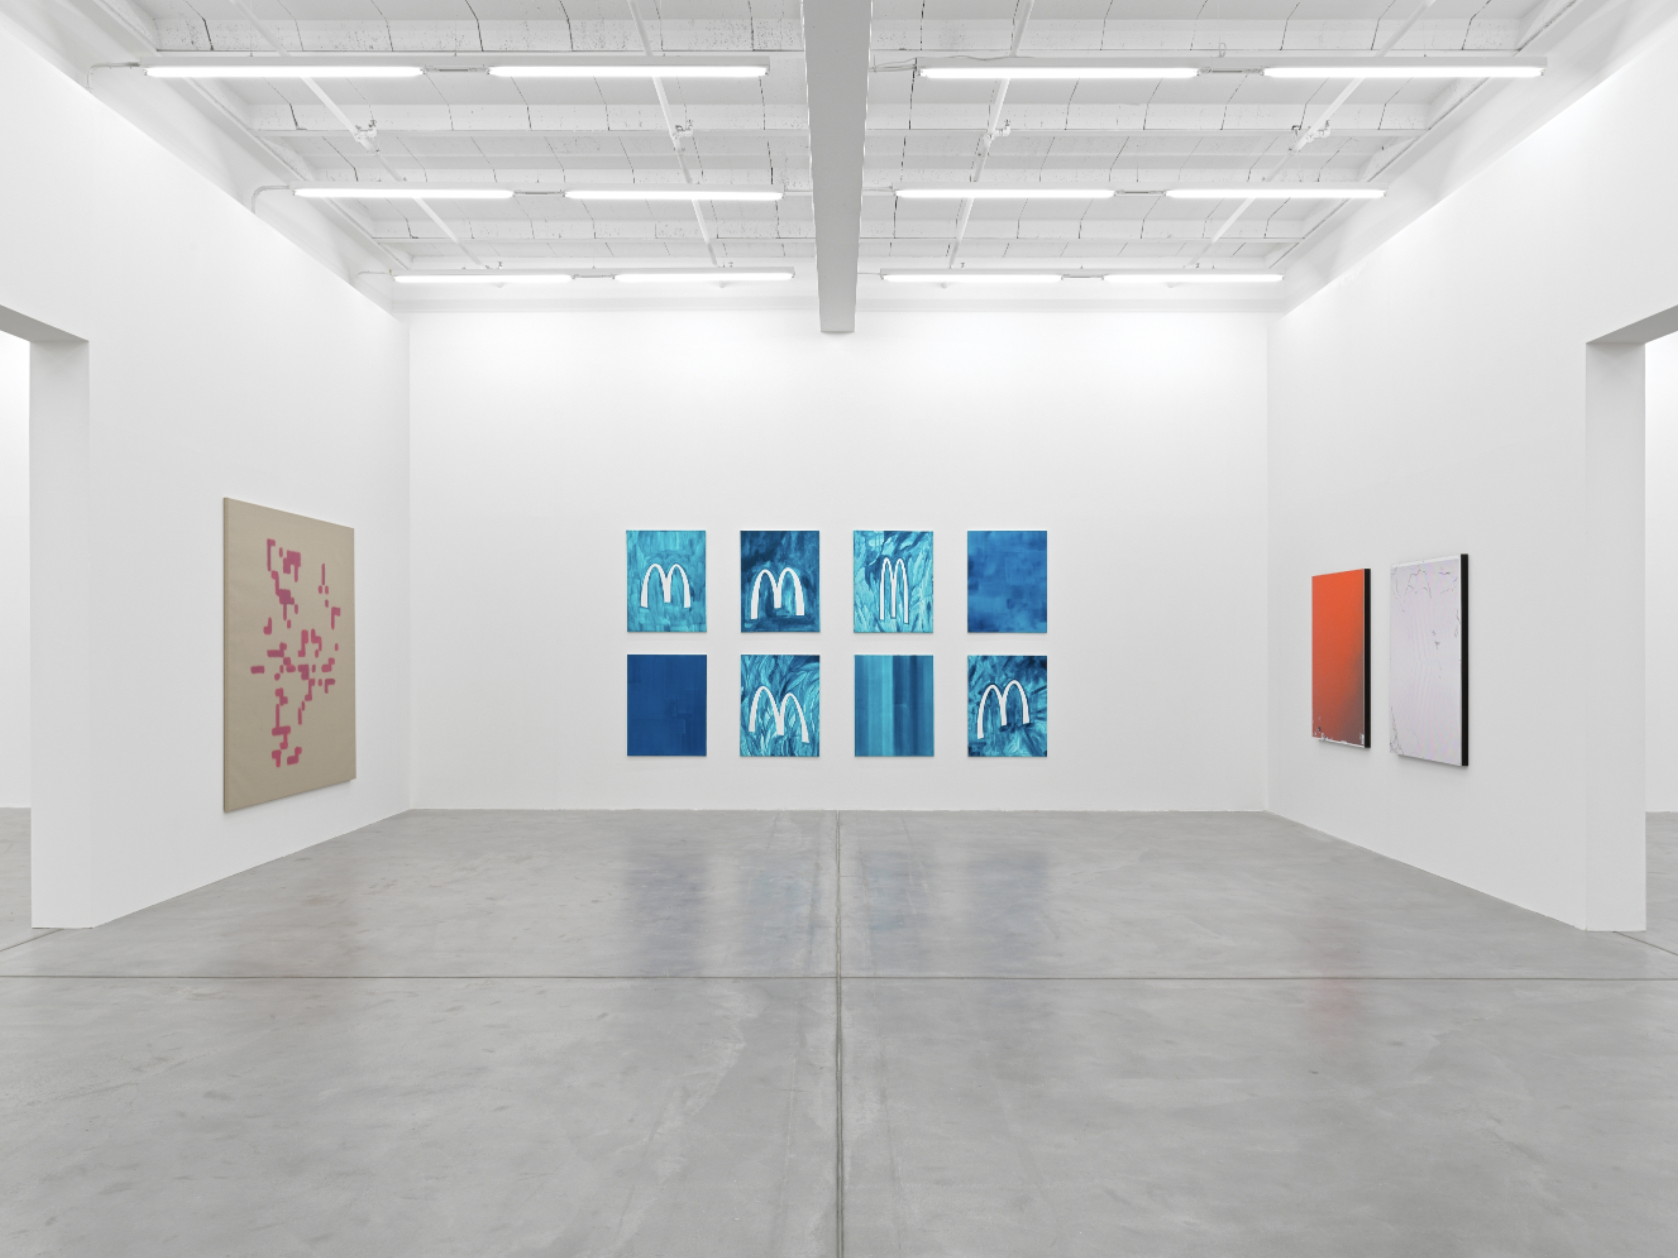 Installation view with works by Tina Braegger, Othmar Farré, and Damien Juillard